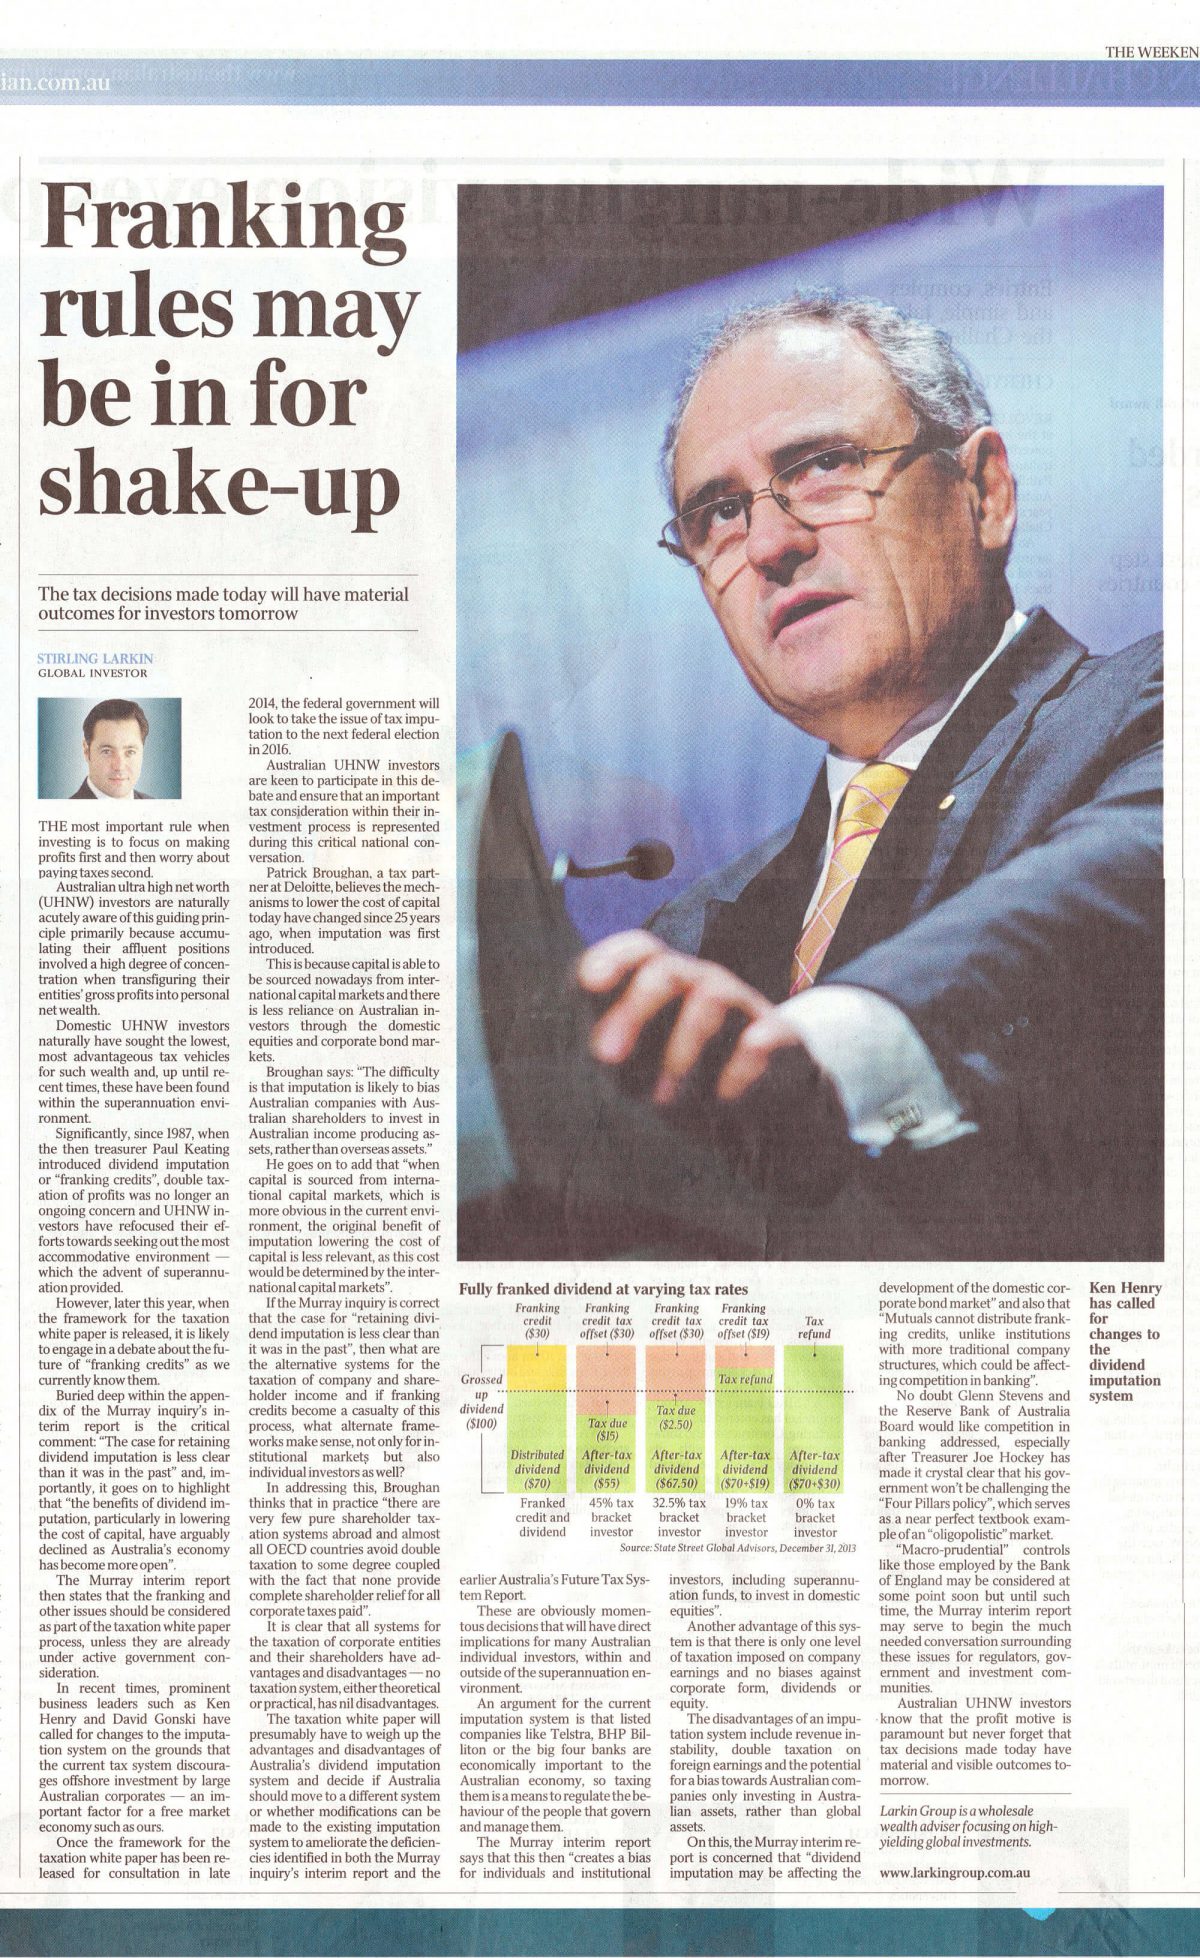 australian standfirst discusses franking changes in 2014 in the australian newspaper